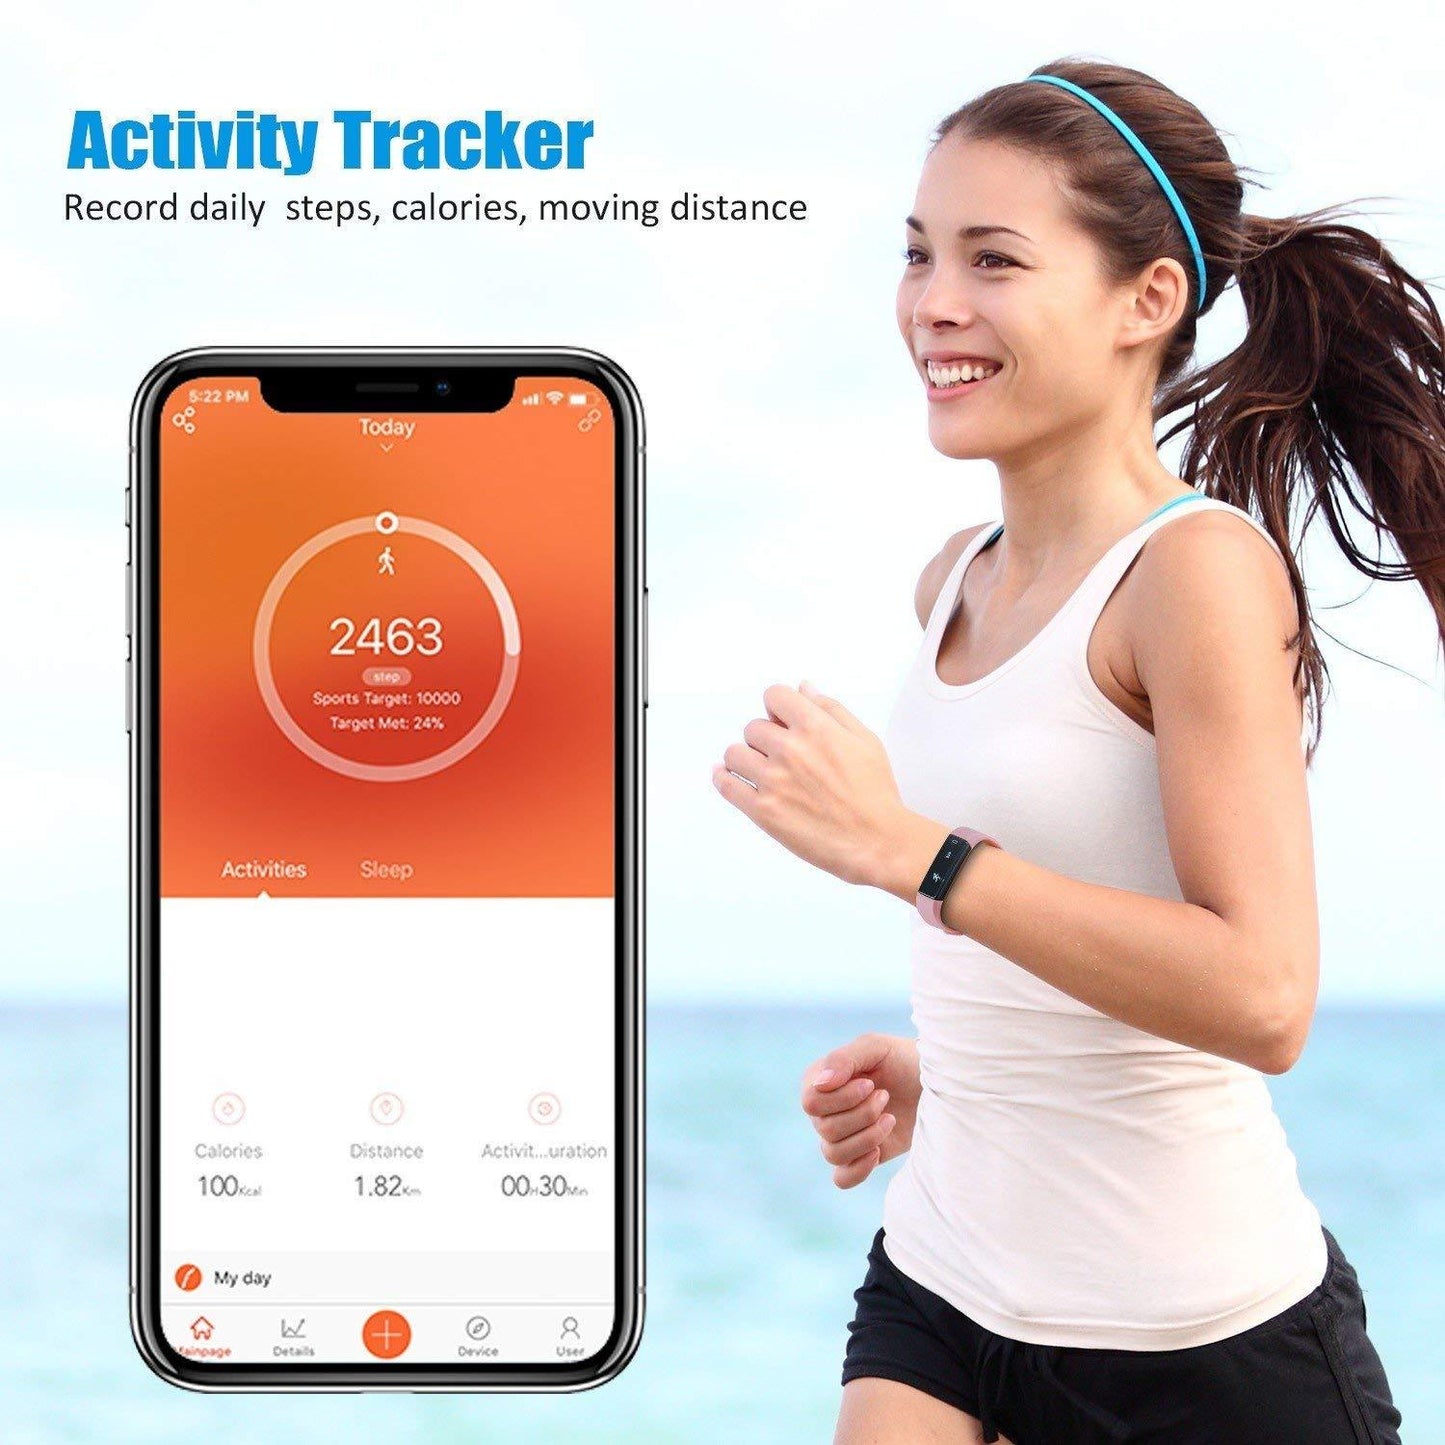 SmartFit Slim Activity Tracker And Monitor Smart Watch With FREE Extra